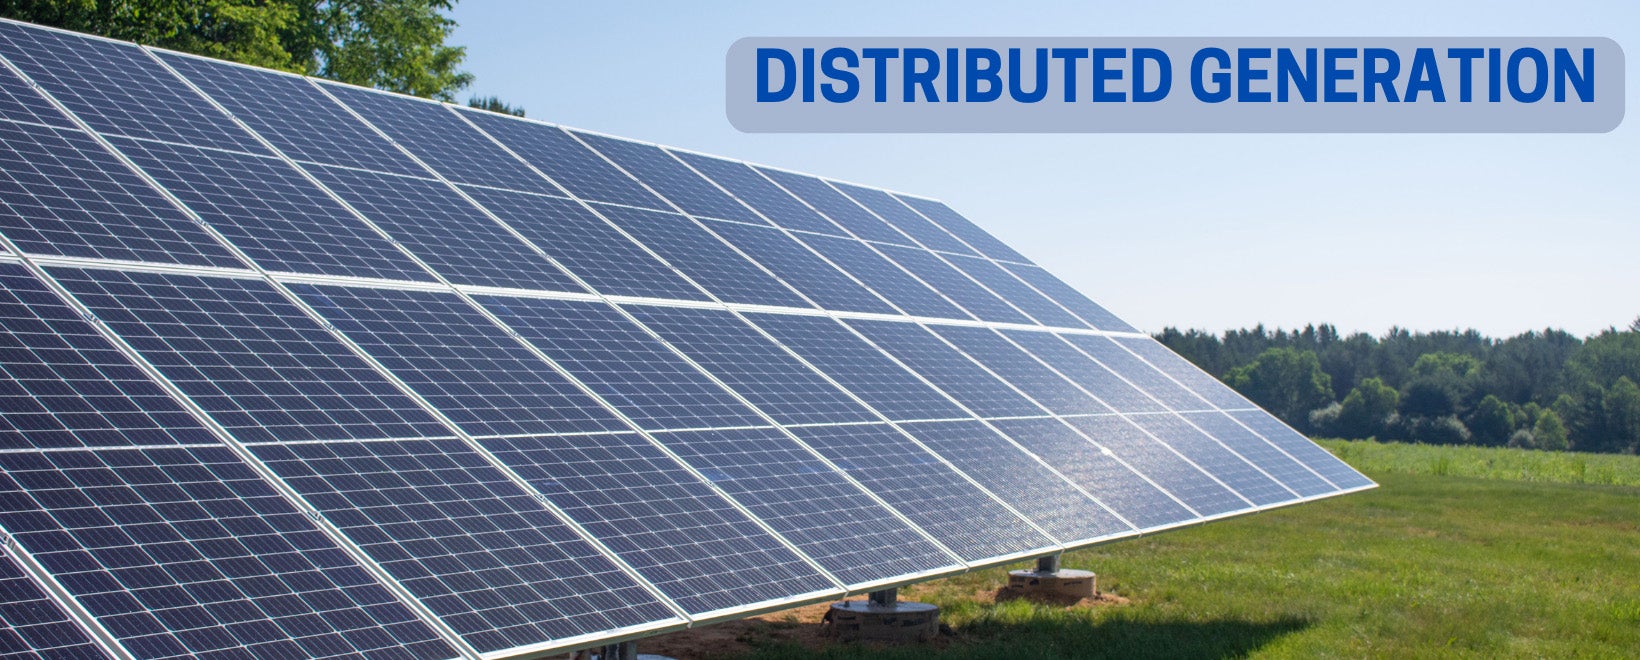 Distributed Generation Cover Photo